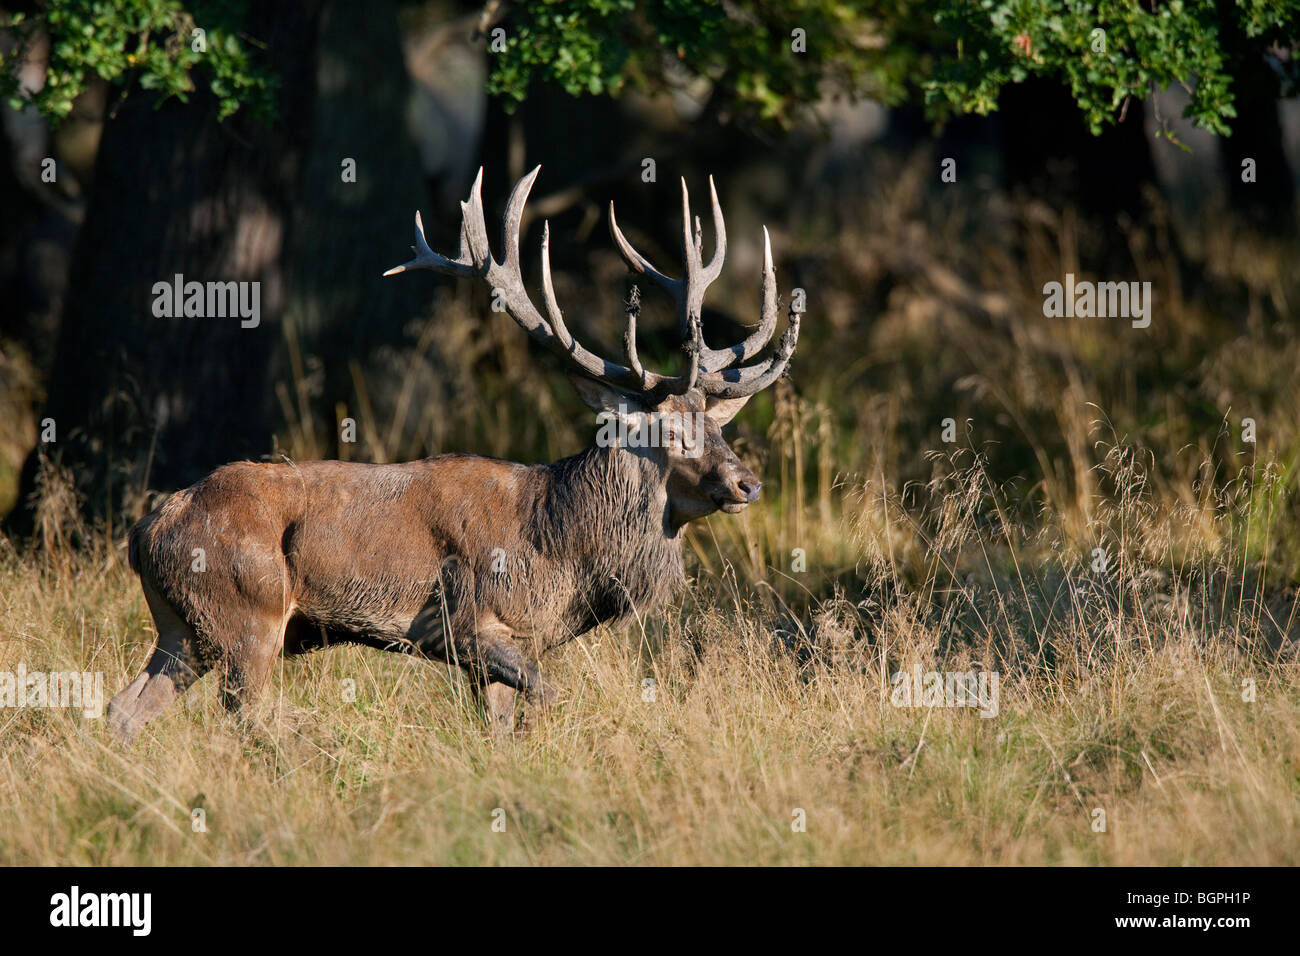 Red deer (Cervus elaphus) stag covered in mud at forest's edge during the rut in autumn Stock Photo